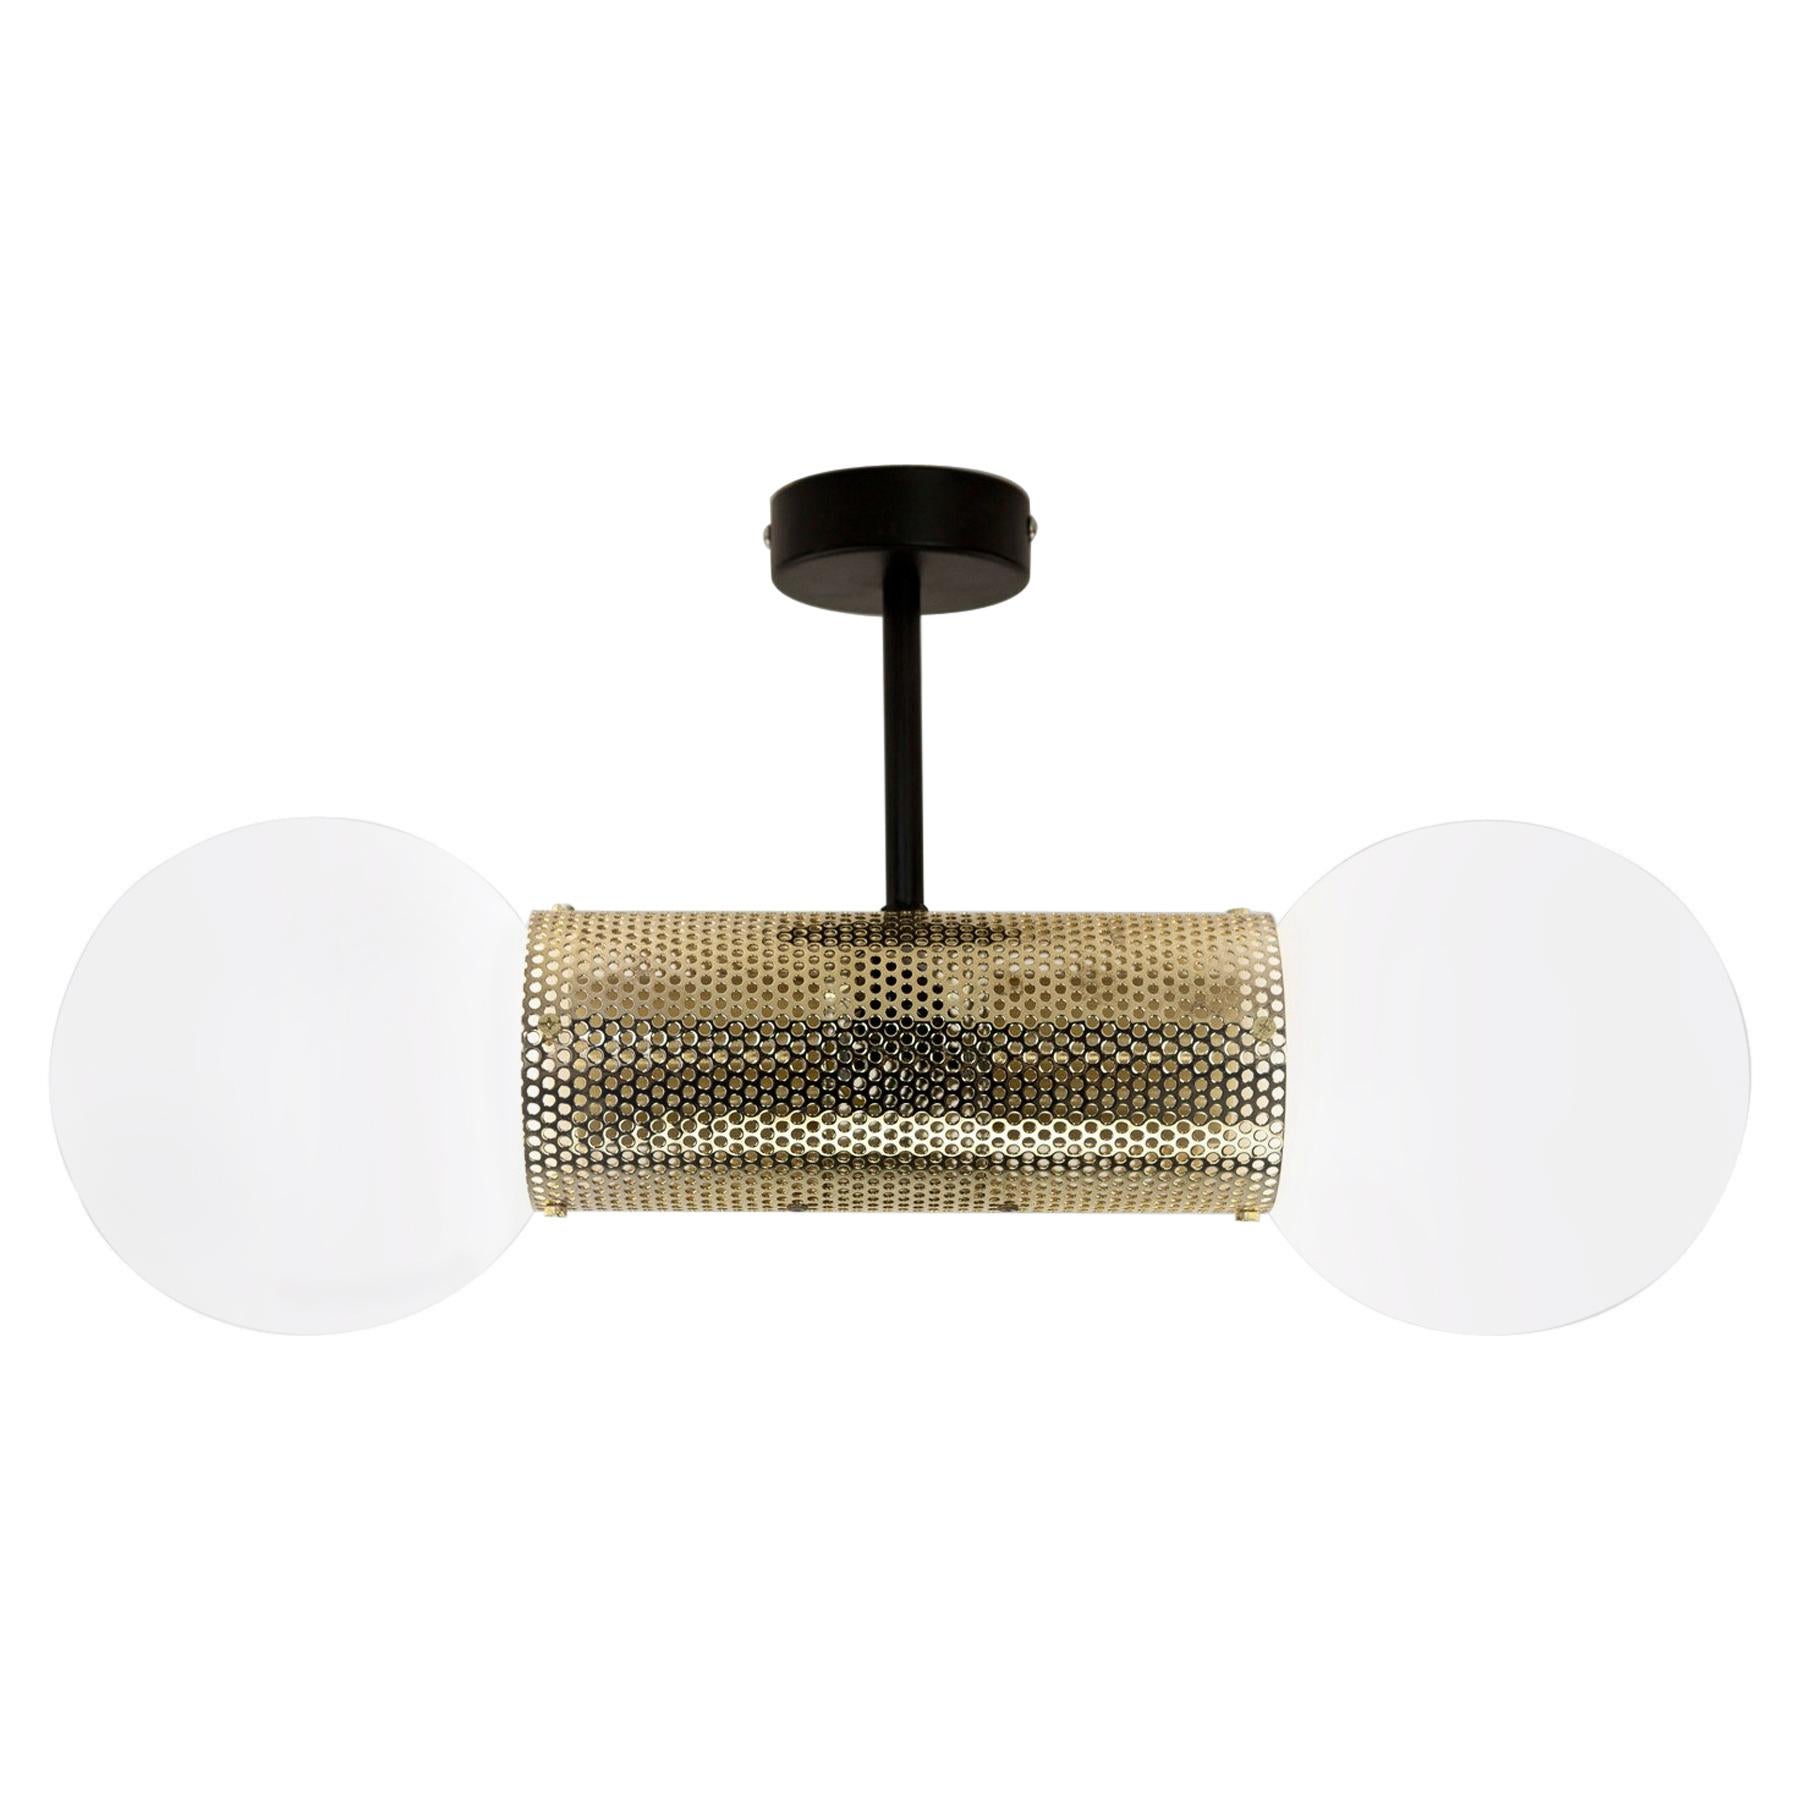 Perf Double Pendant Light, Brass Perforated Tube, Glass Round Orb Shades